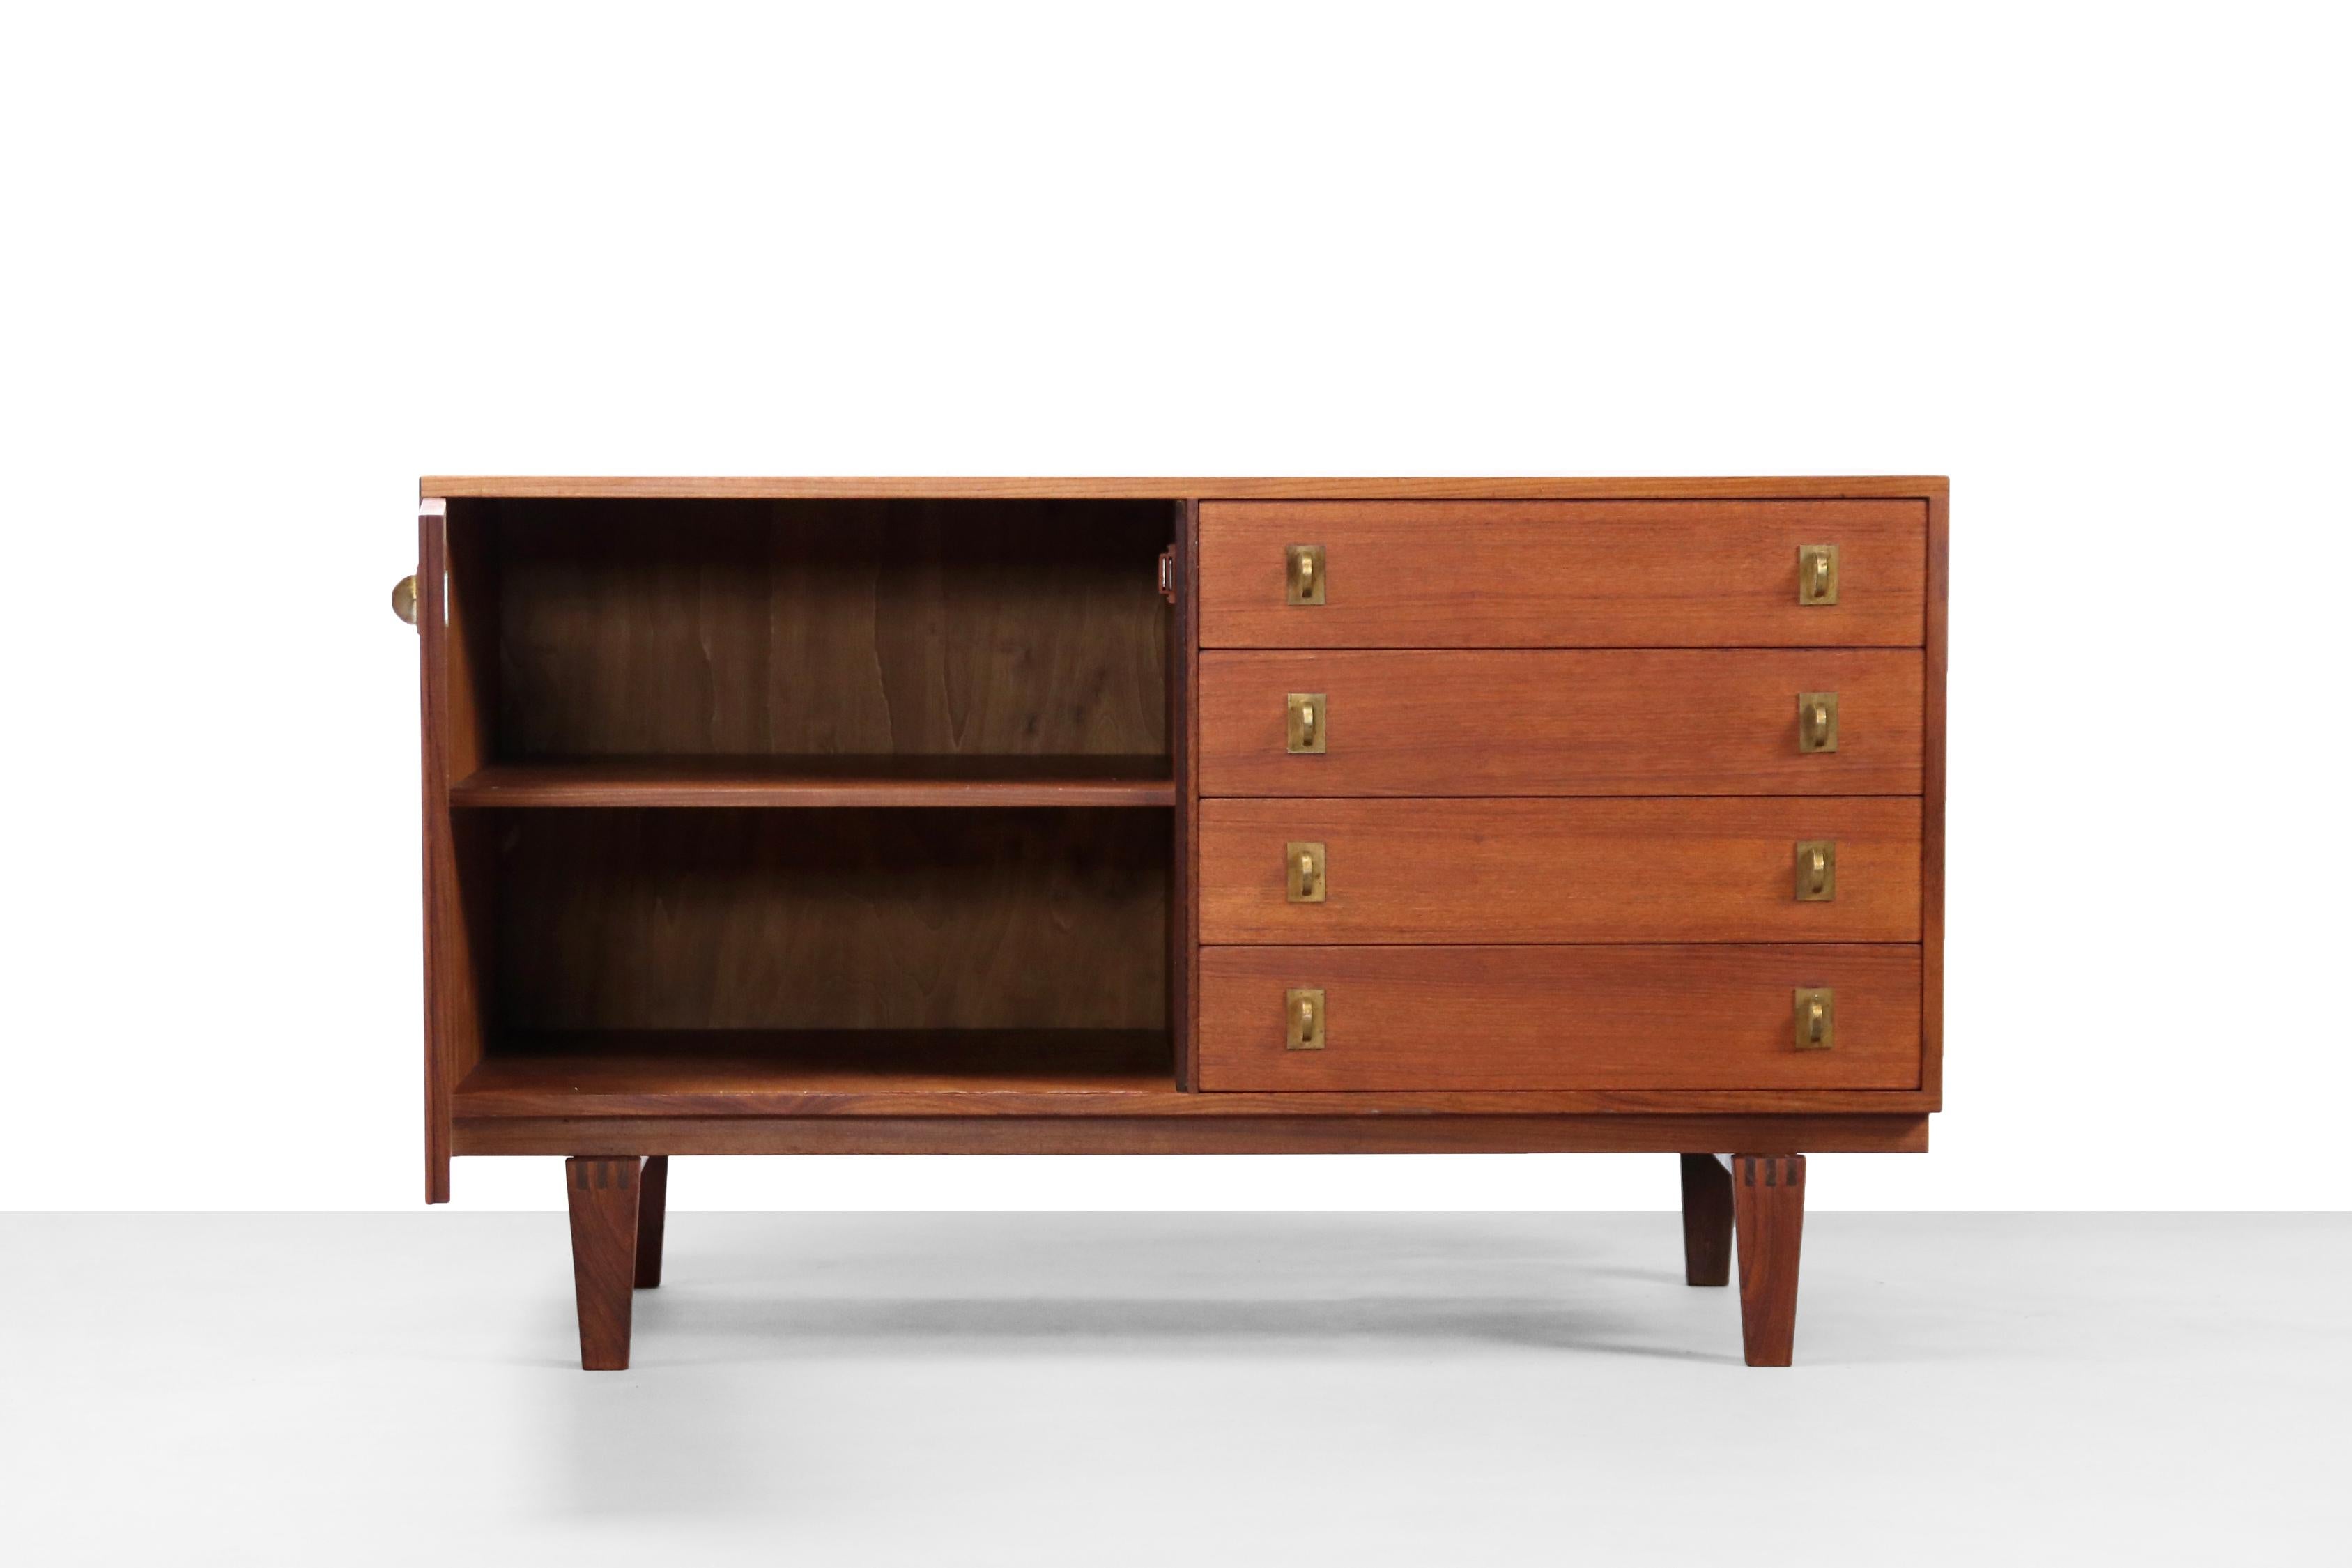 You don't see craftsmanship in this quality that often. Beautiful Danish vintage design sideboard in teak and brass, designed in the sixties by Peter Løvig Nielsen. On the left side of the dresser is a door with a shelf behind it, on the right you